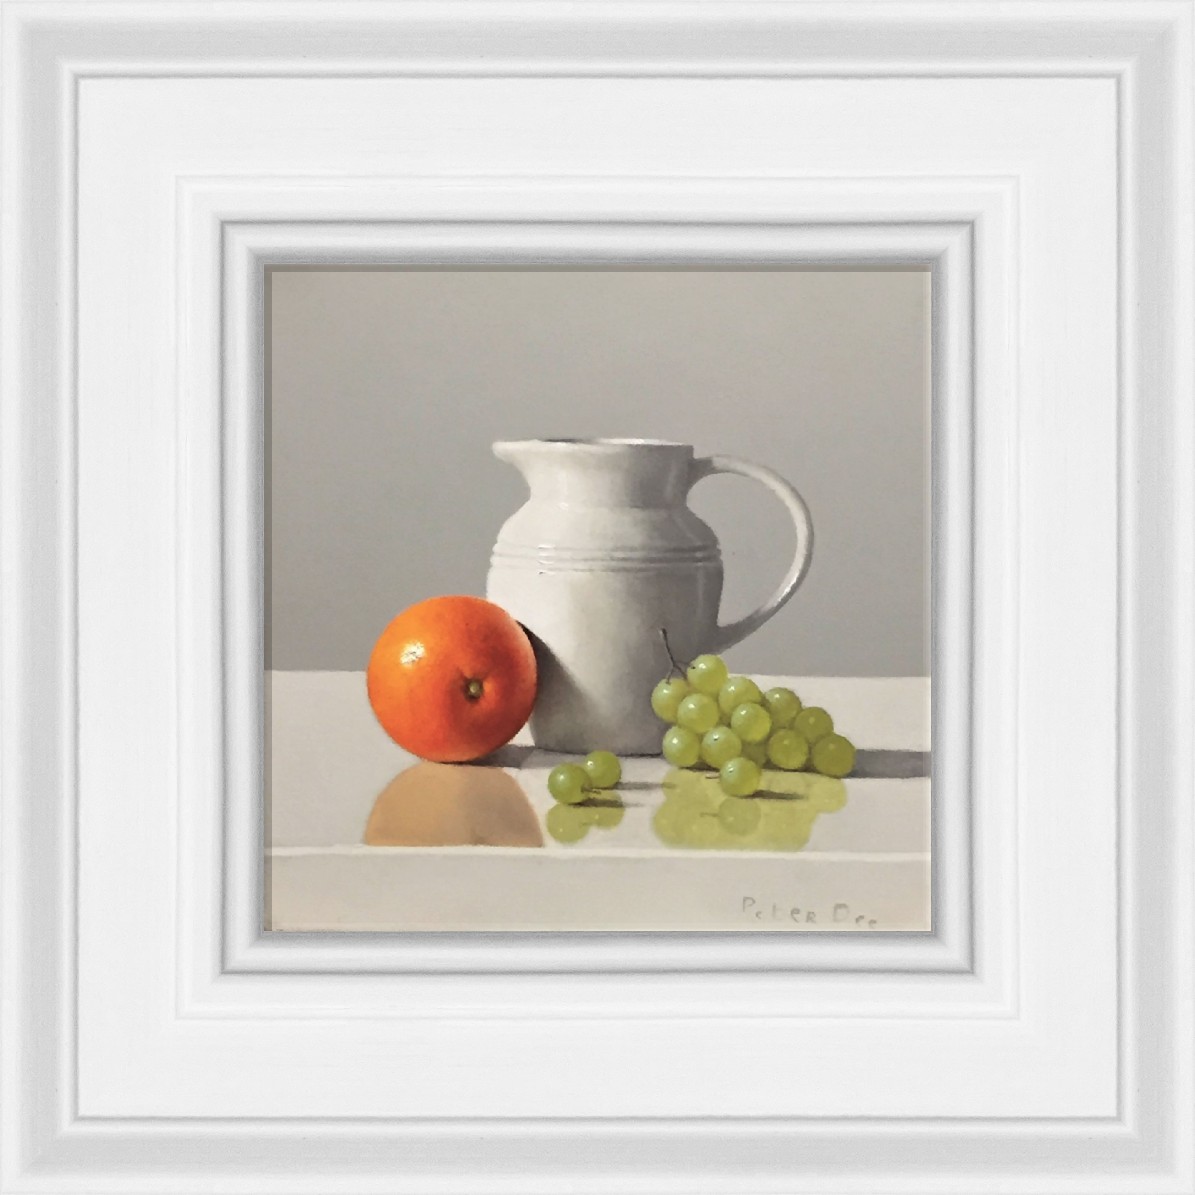 Jug with Fruit by Peter Dee